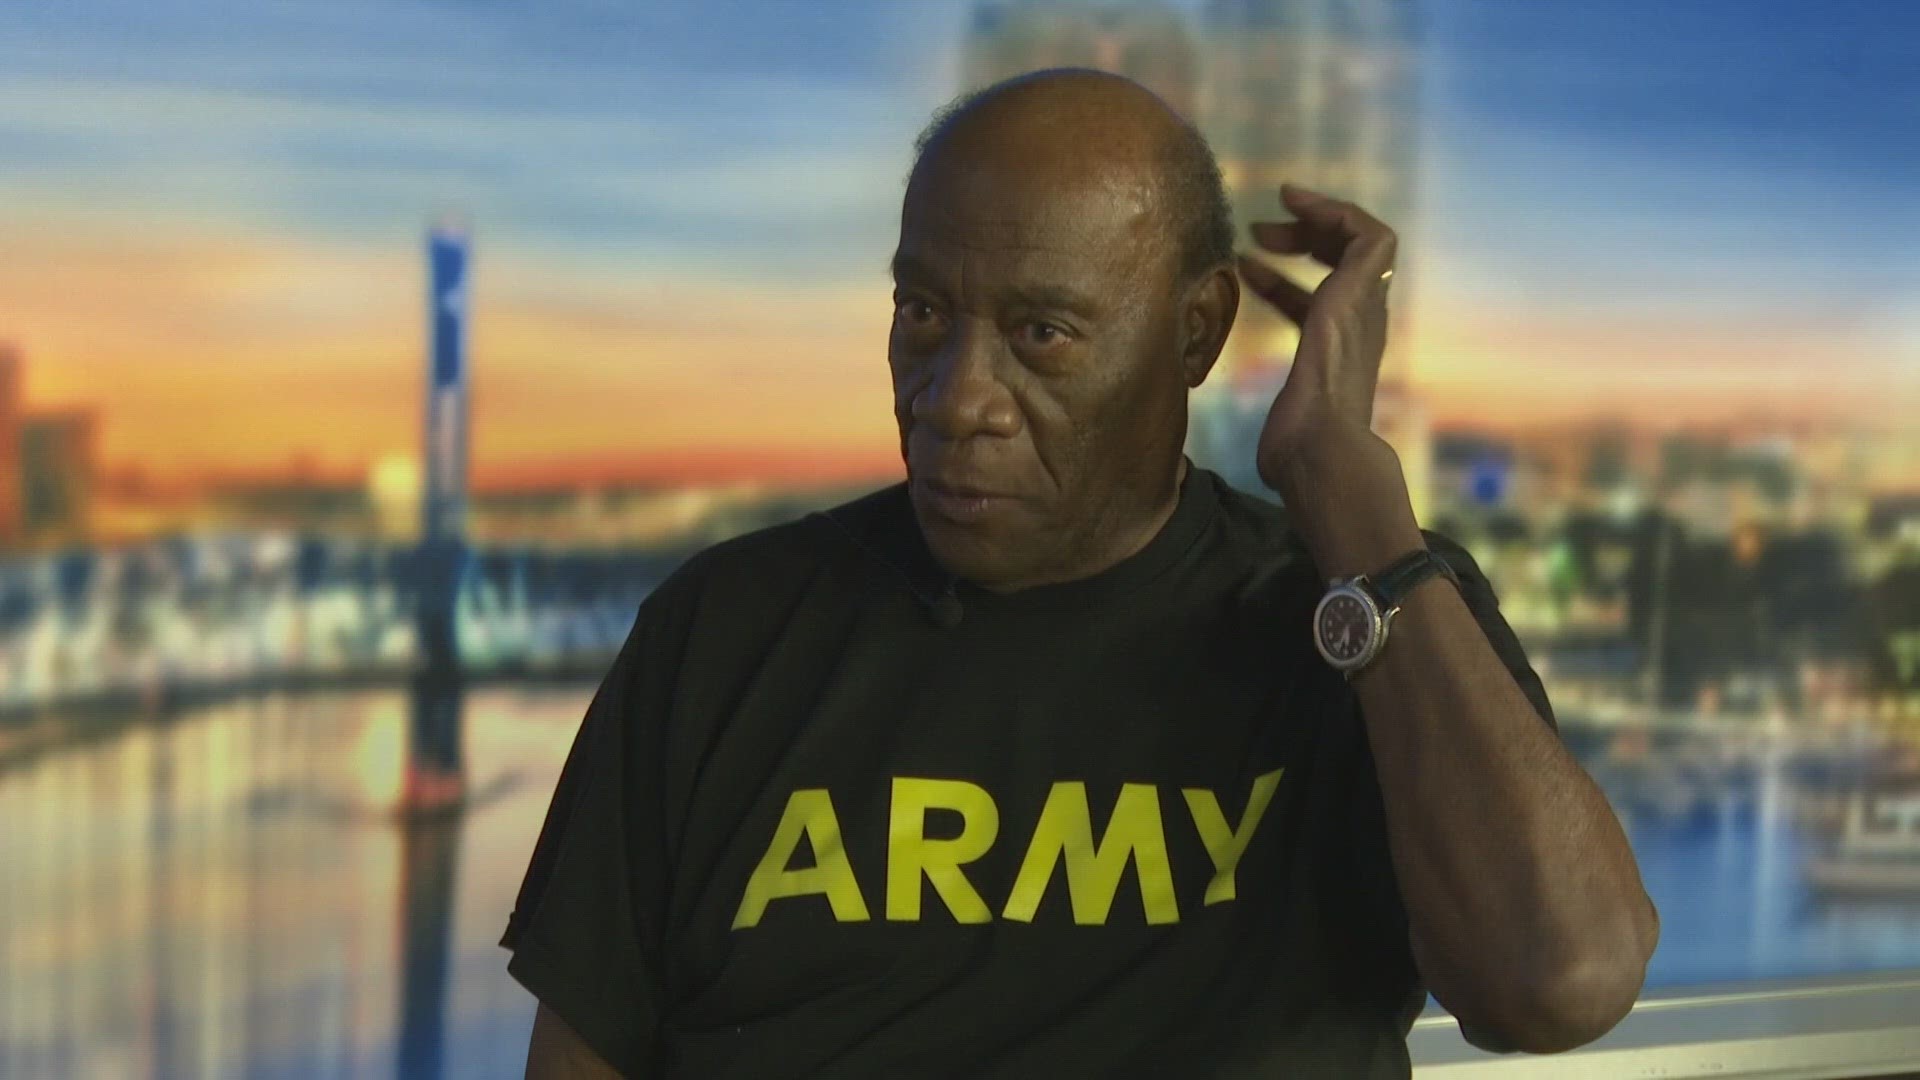 Johnnie Rowe Jr. told First Coast News that experiencing and being a part of war is an "indentation on your brain."